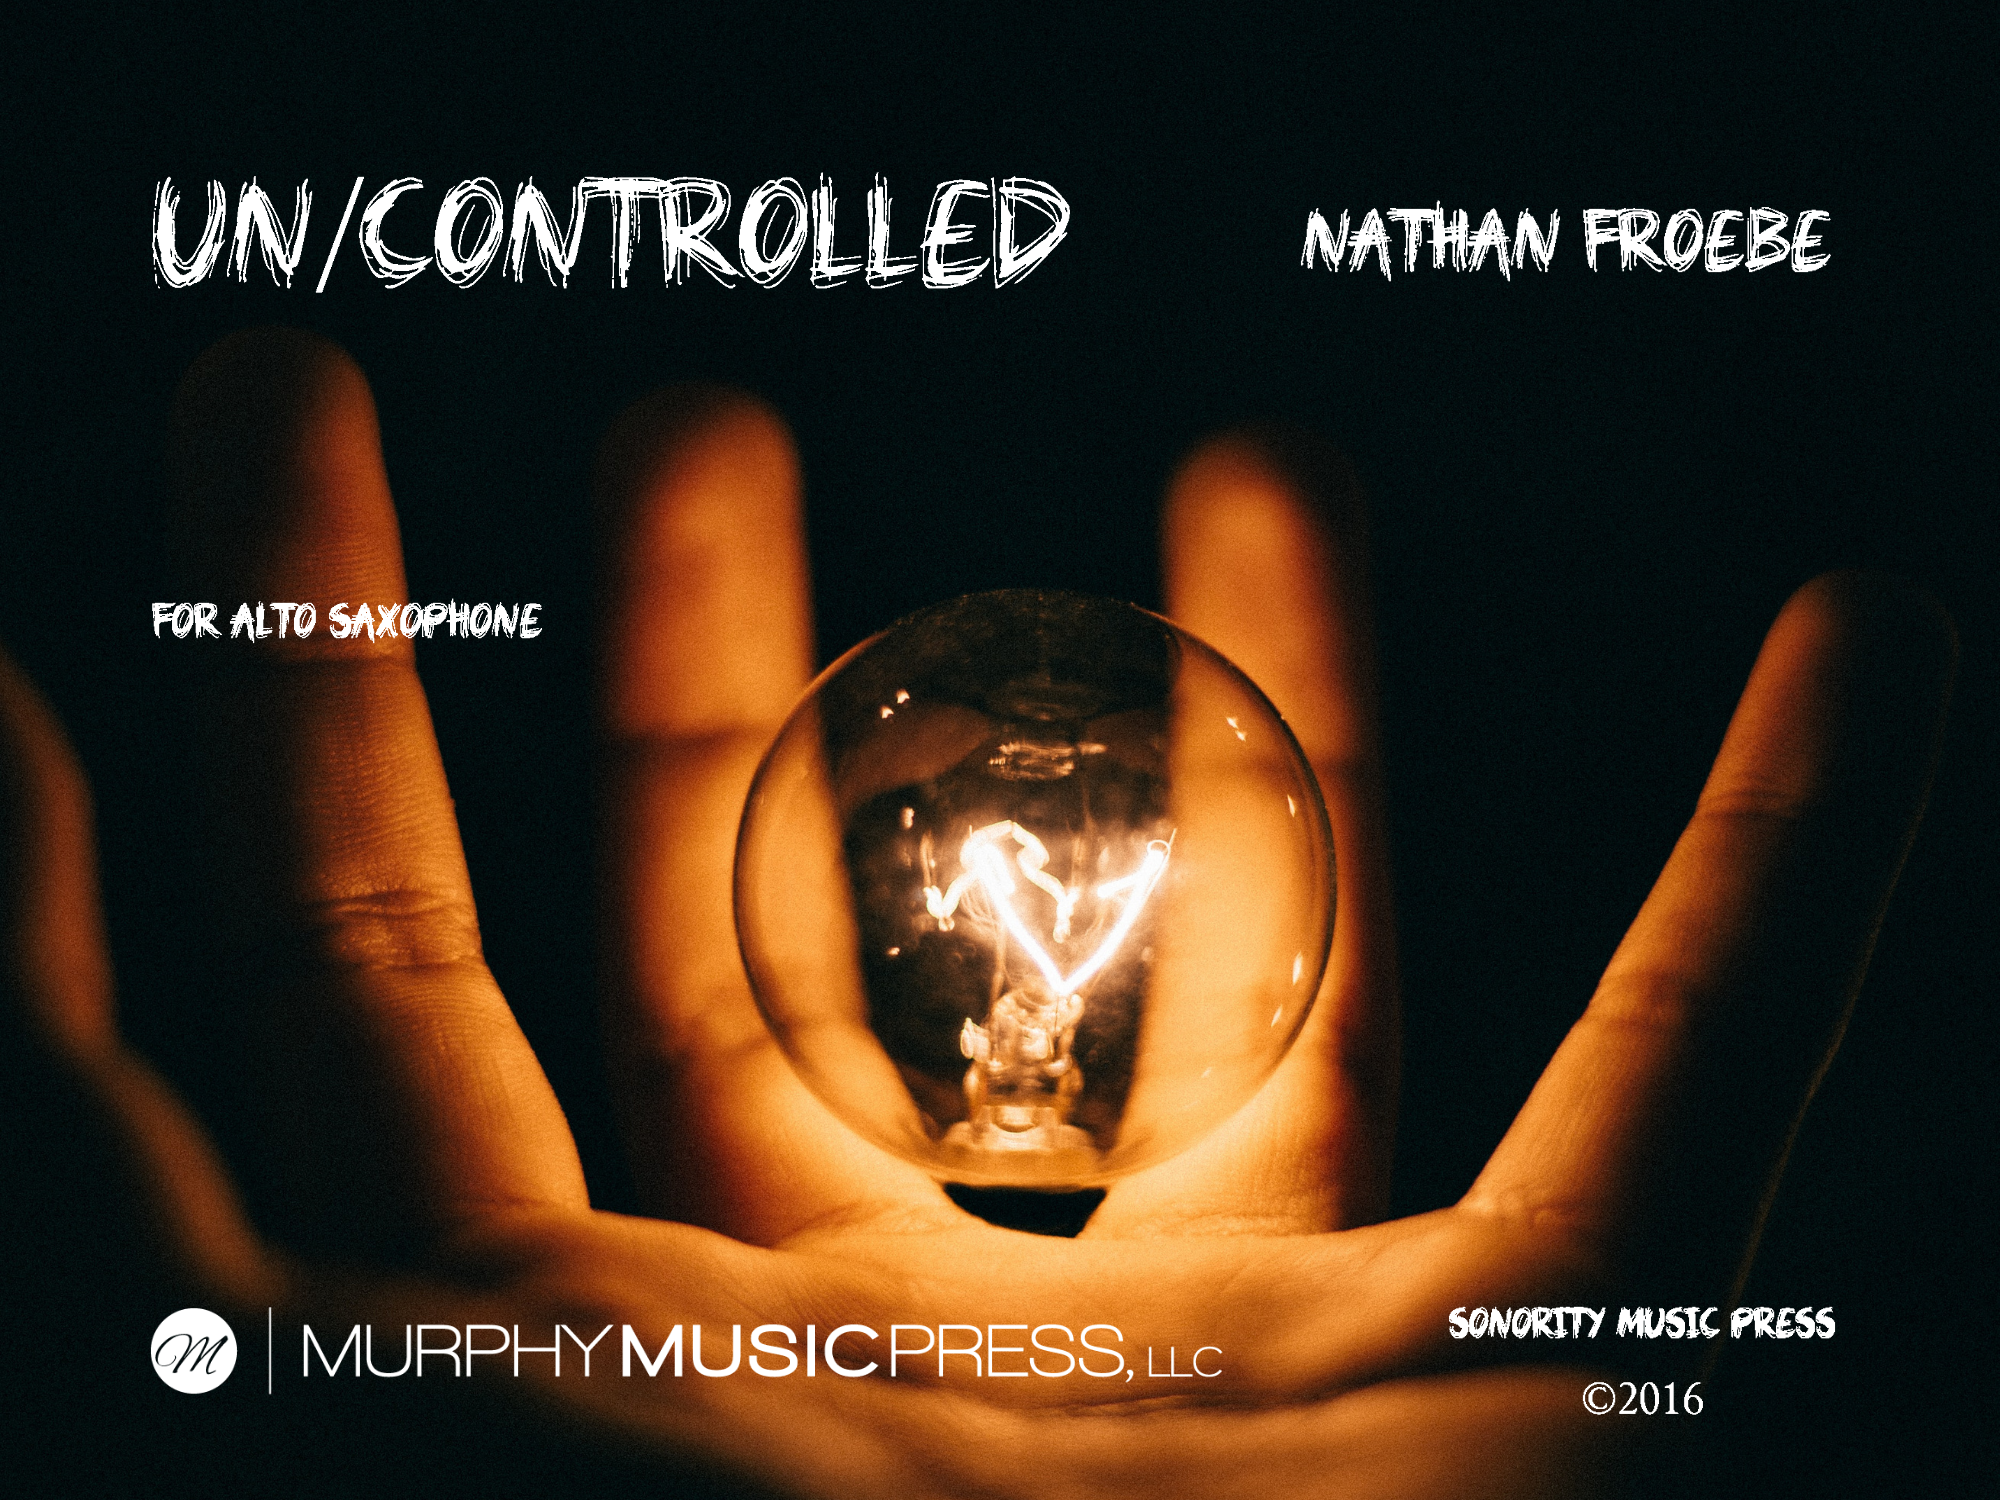 Un/Controlled  by Nathan Froebe